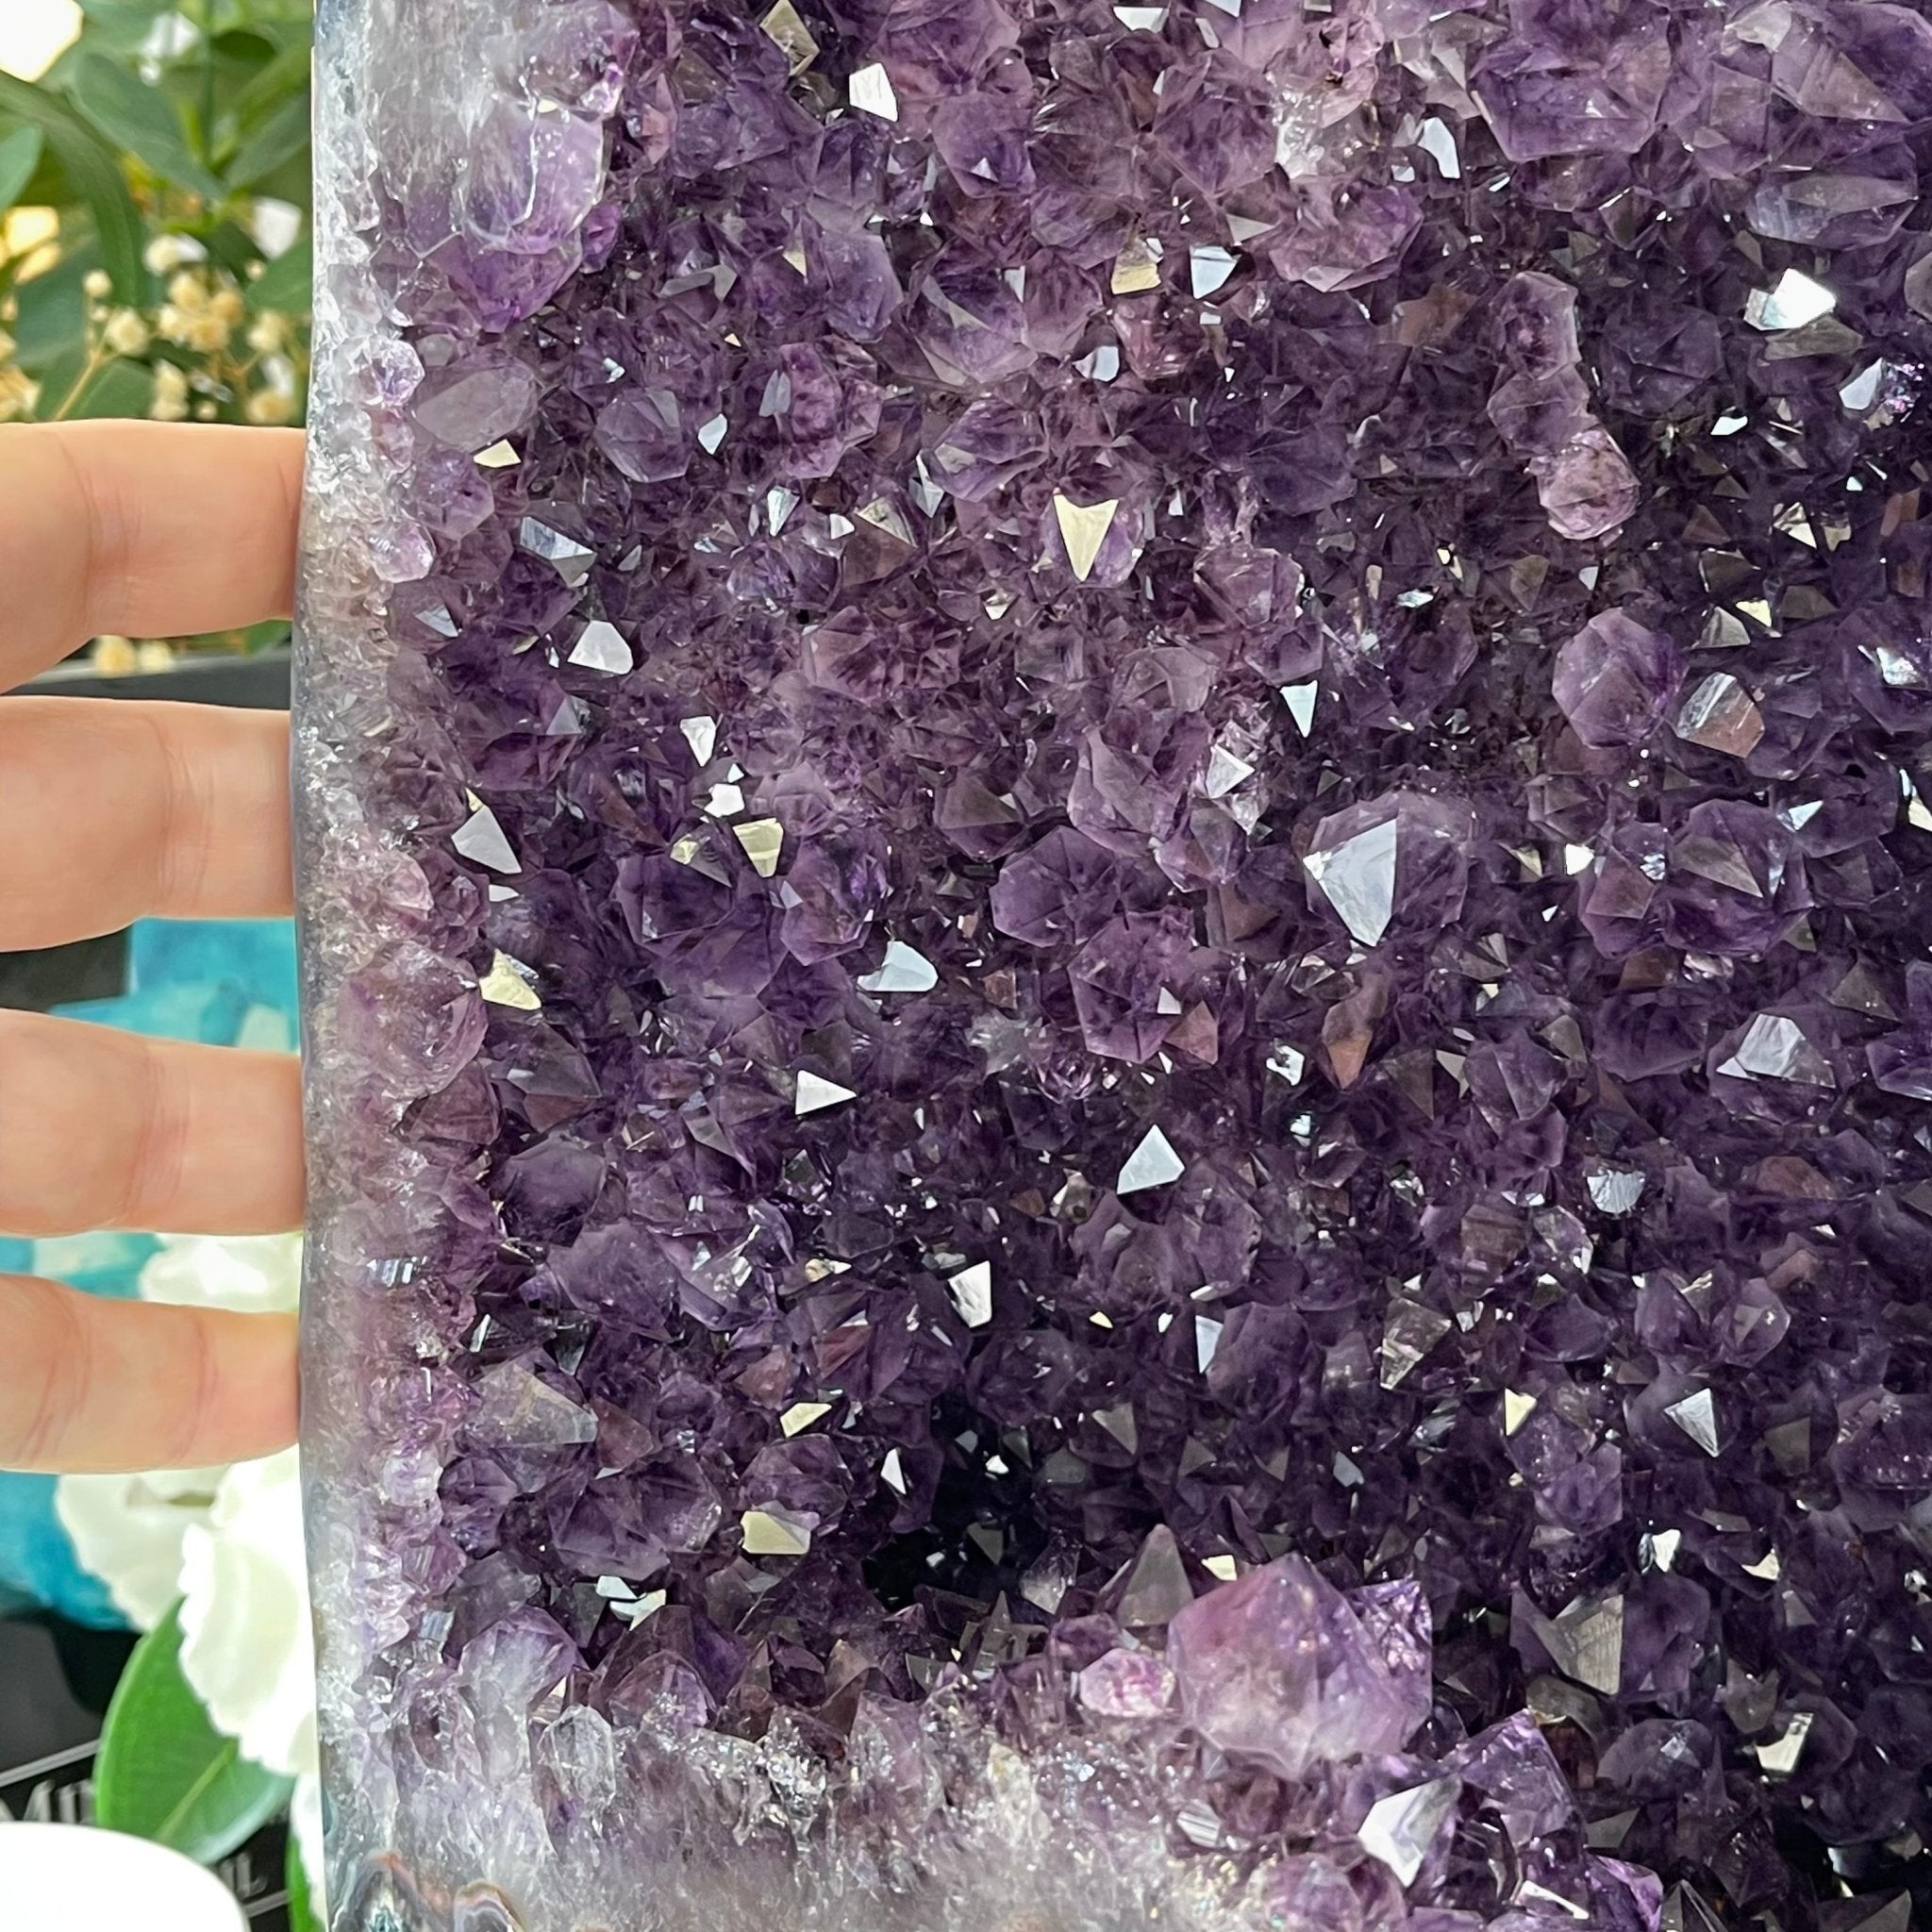 Super Quality Brazilian Amethyst Cathedral, 50.1 lbs & 17" Tall #5601-0849 by Brazil Gems - Brazil GemsBrazil GemsSuper Quality Brazilian Amethyst Cathedral, 50.1 lbs & 17" Tall #5601-0849 by Brazil GemsCathedrals5601-0849